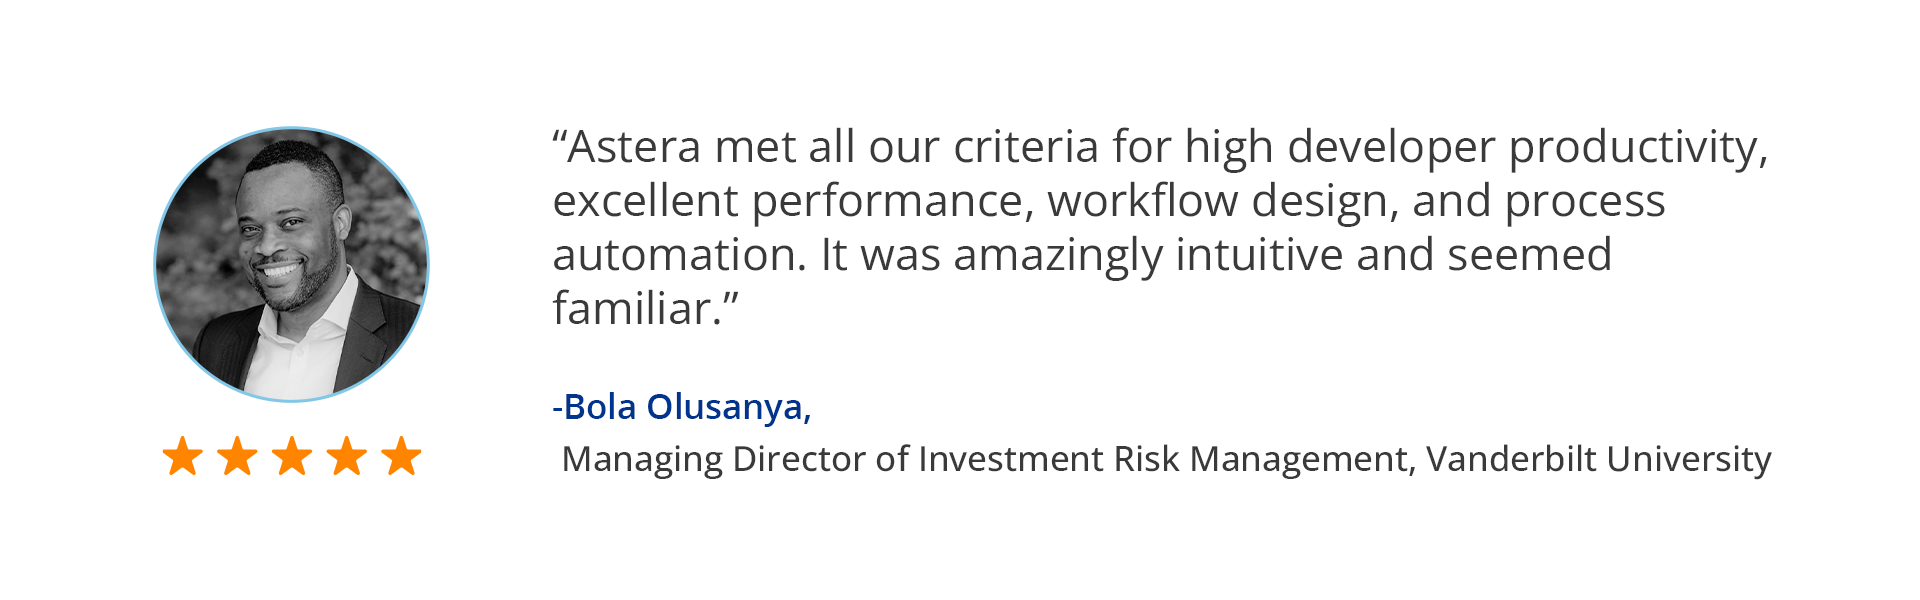 Client review for Astera.